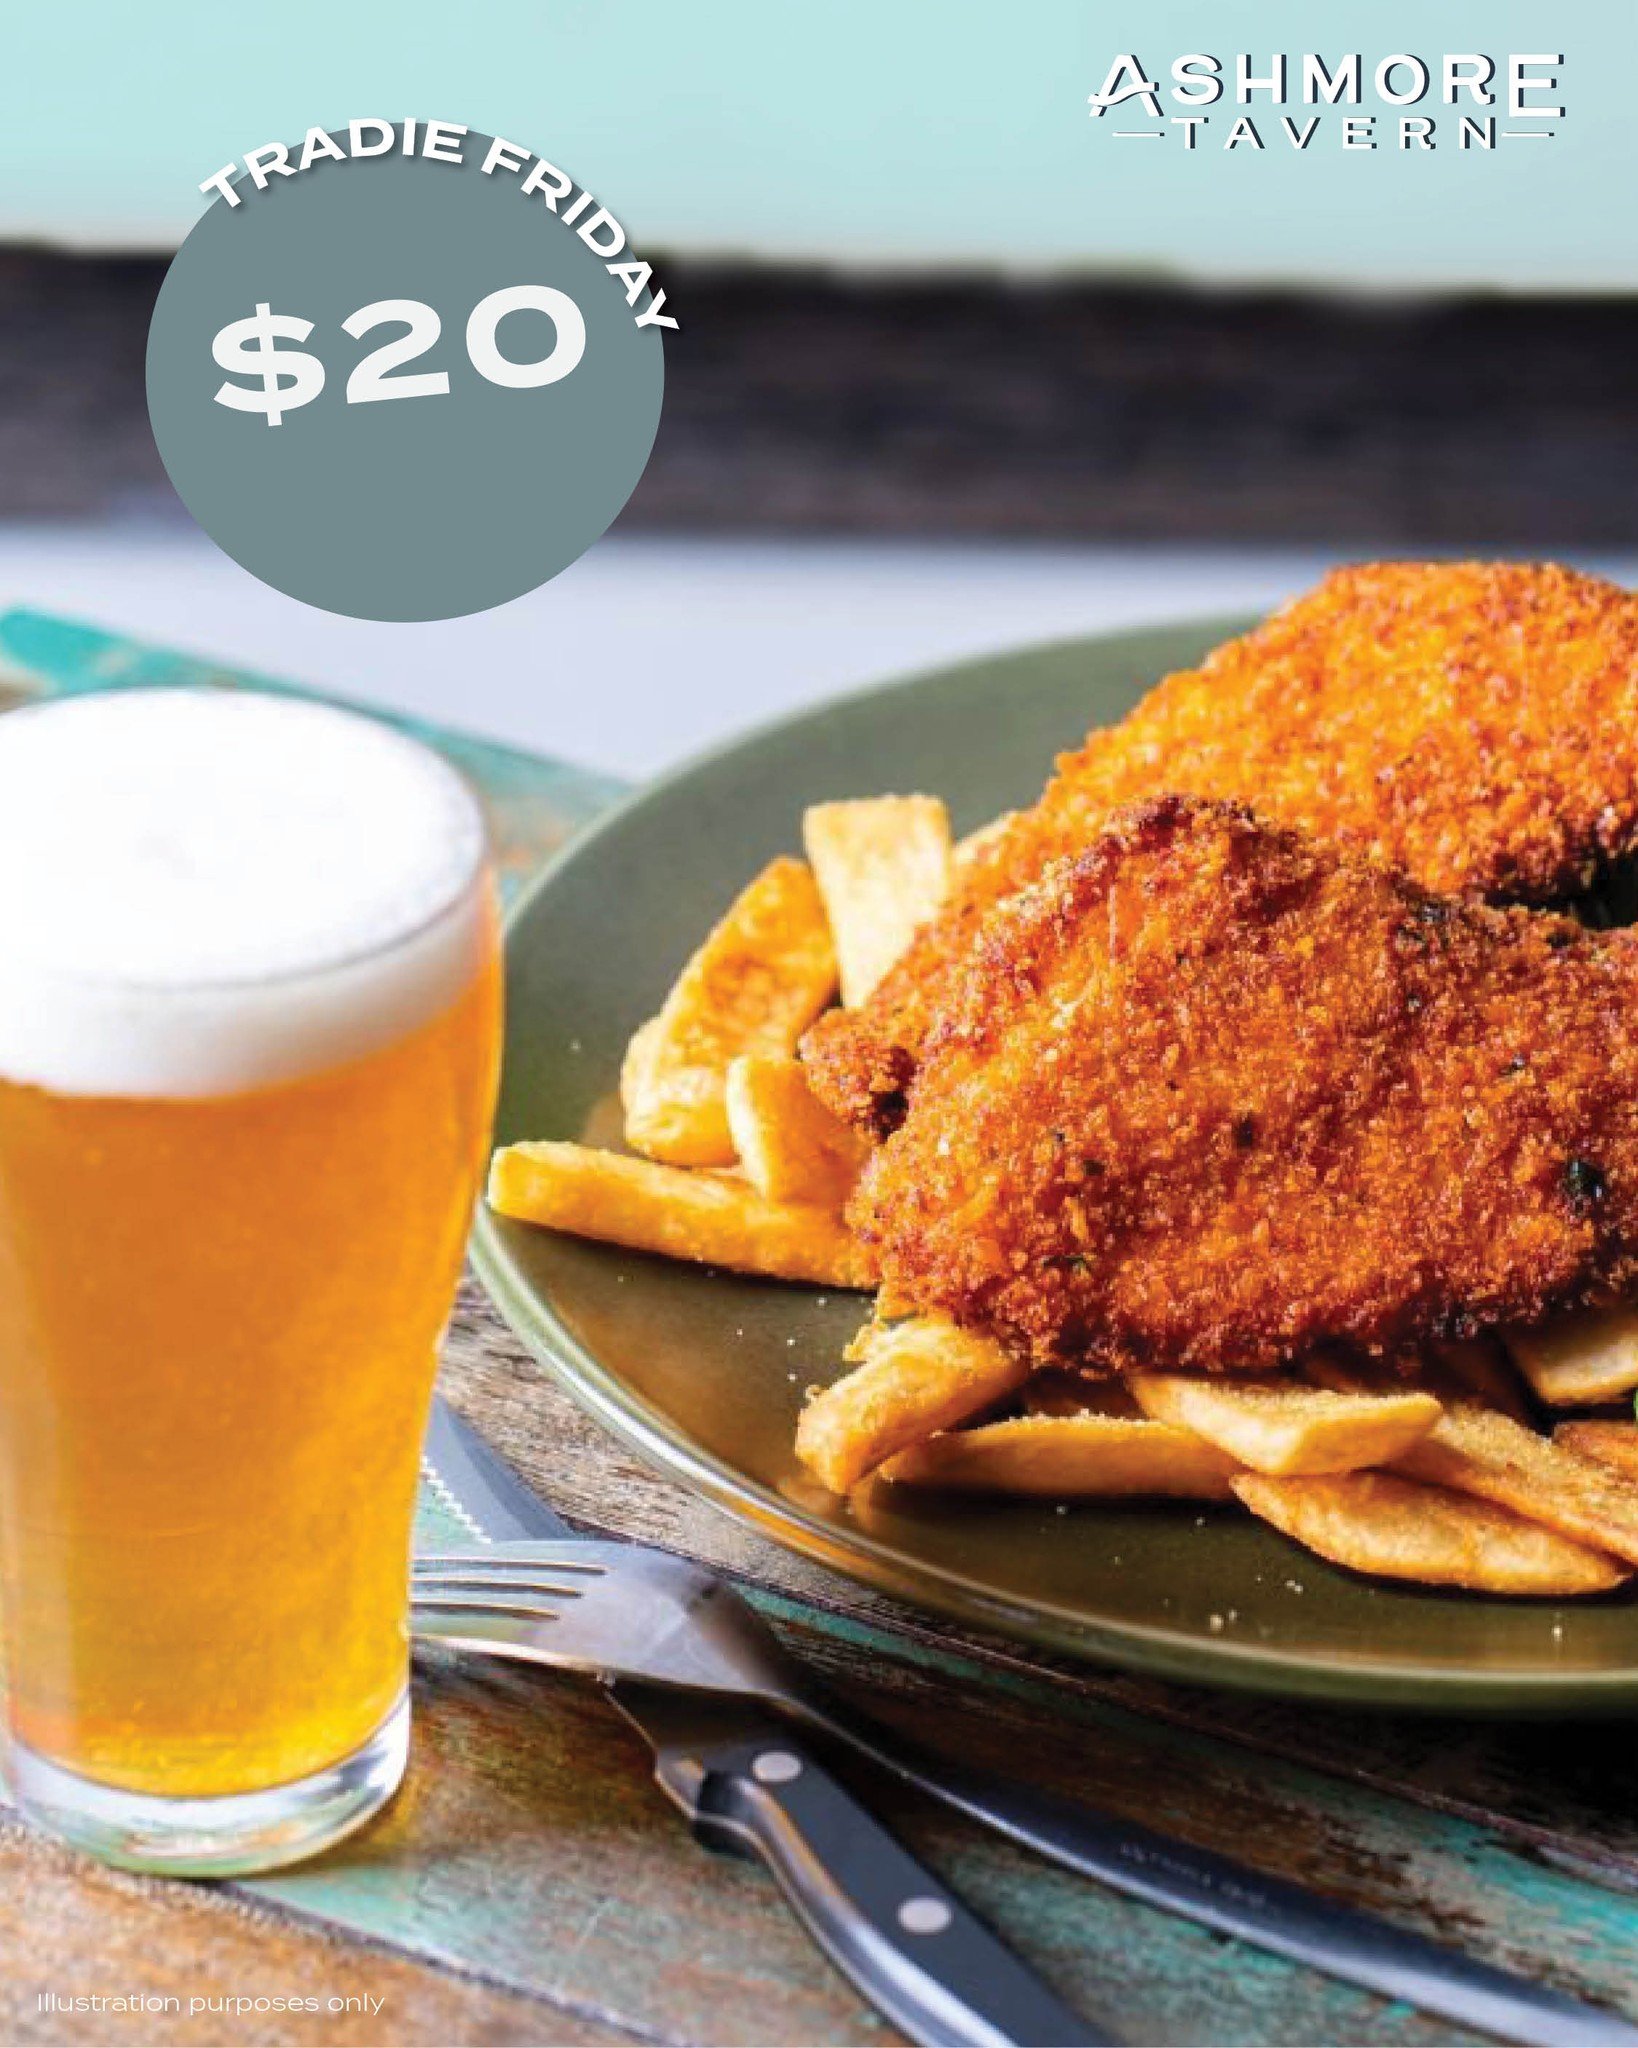 Kick back and relax at Ashmore Tavern today with our Friday Public Bar Tradie Special! 🤩🎉

Enjoy a hearty 250g chicken schnitzel served with crispy beer battered chips, gravy, and a refreshing pot of Great Northern Original or Super Crisp for only 